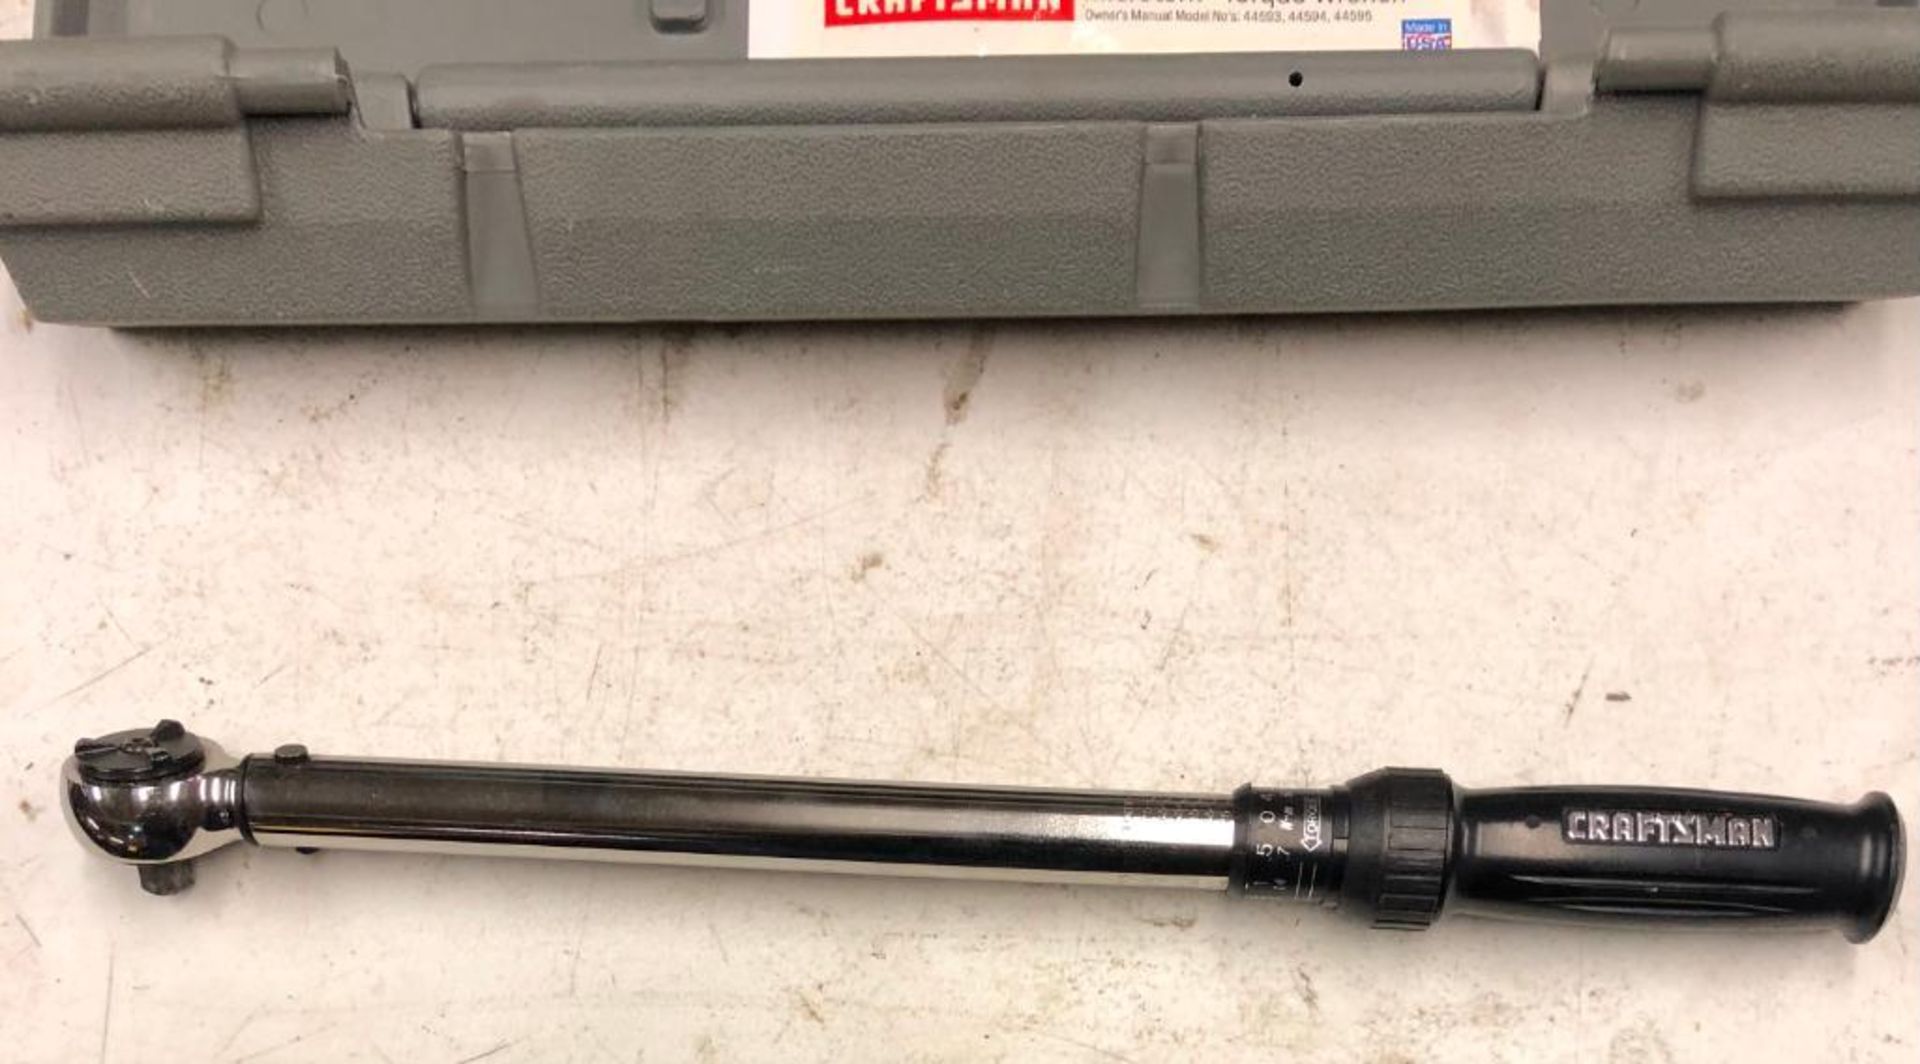 CRAFTSMAN MICROTORK TORQUE WRENCH, S/N 5103453102 - Image 3 of 3